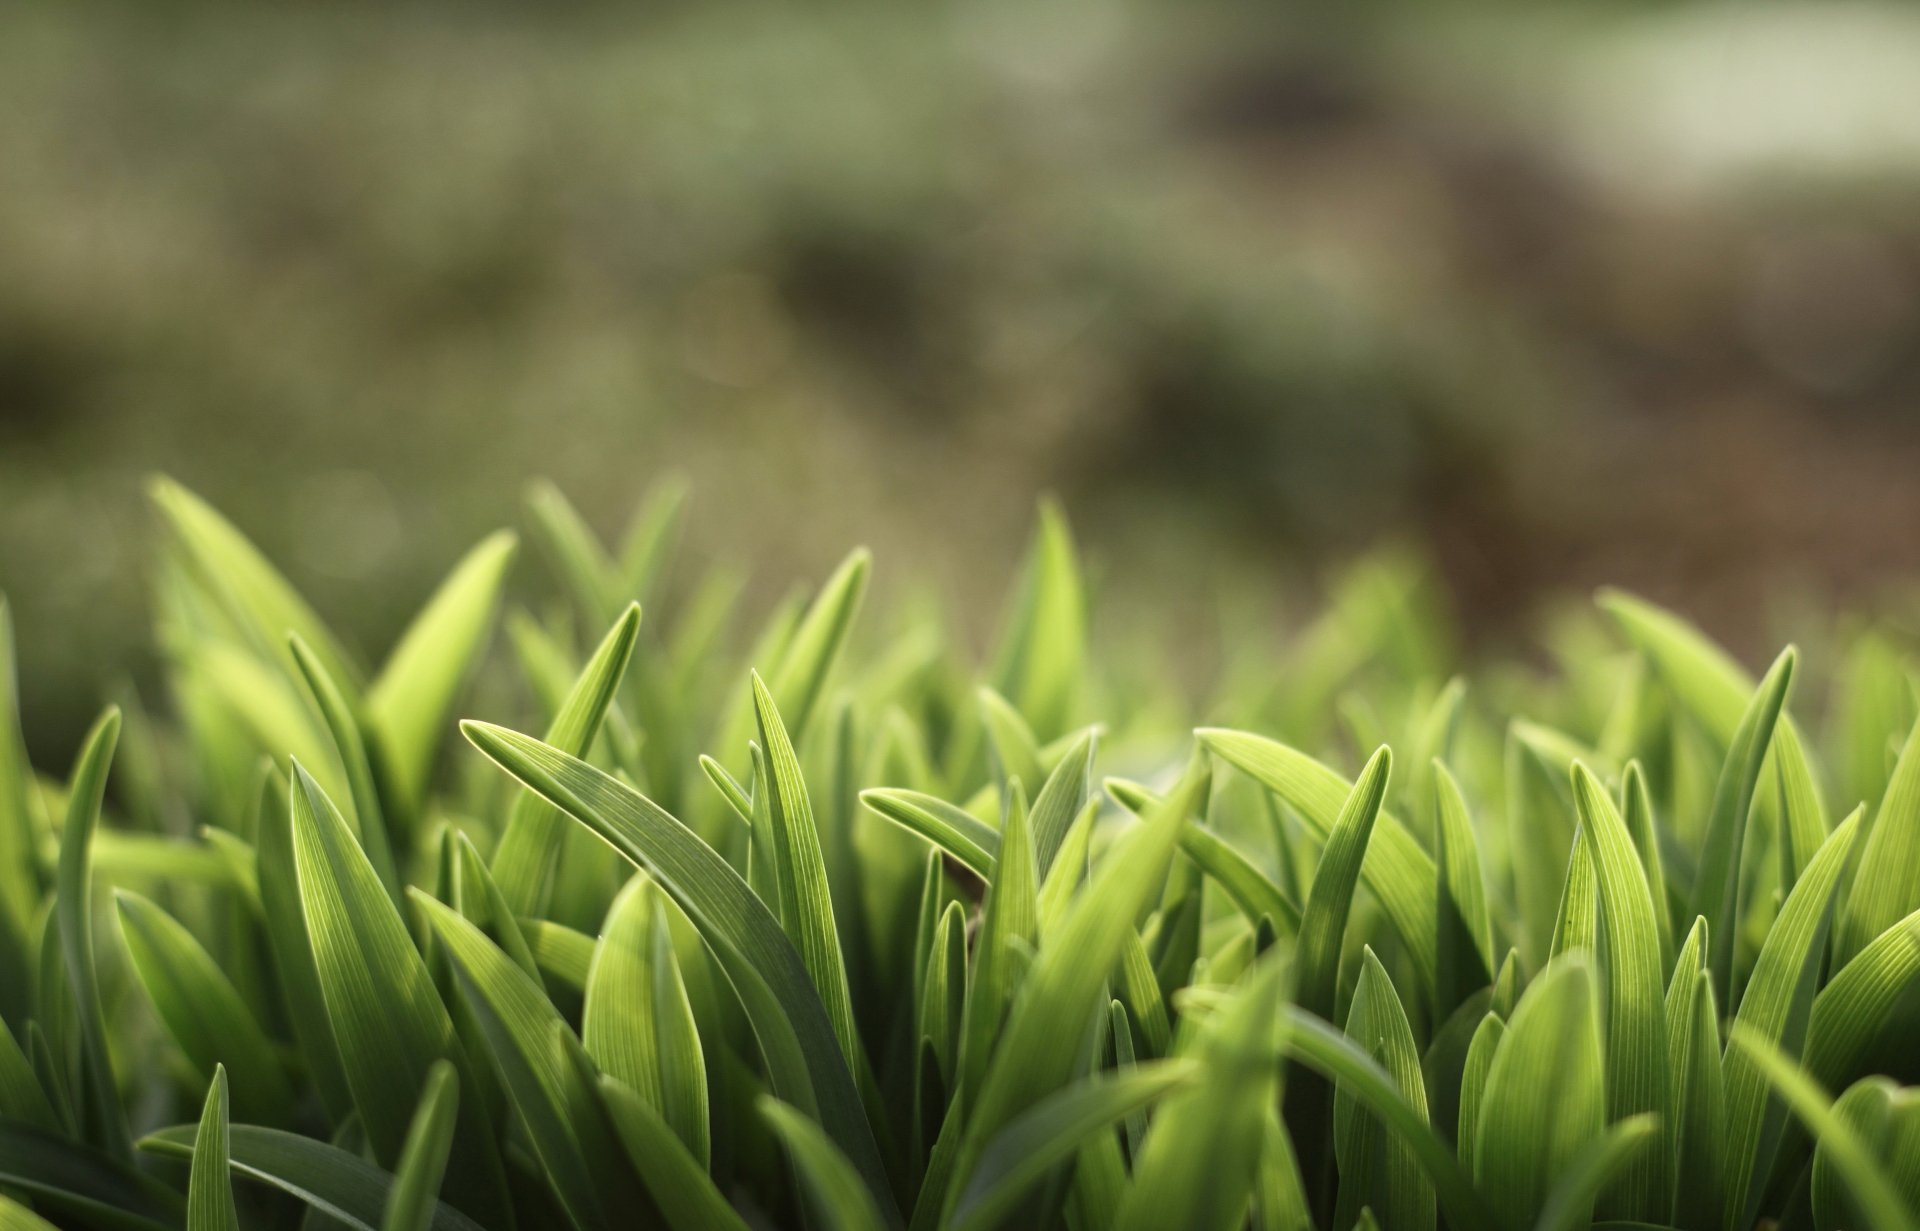 Grass 4k Ultra HD Wallpaper and Background Image | 4752x3047 | ID:208785